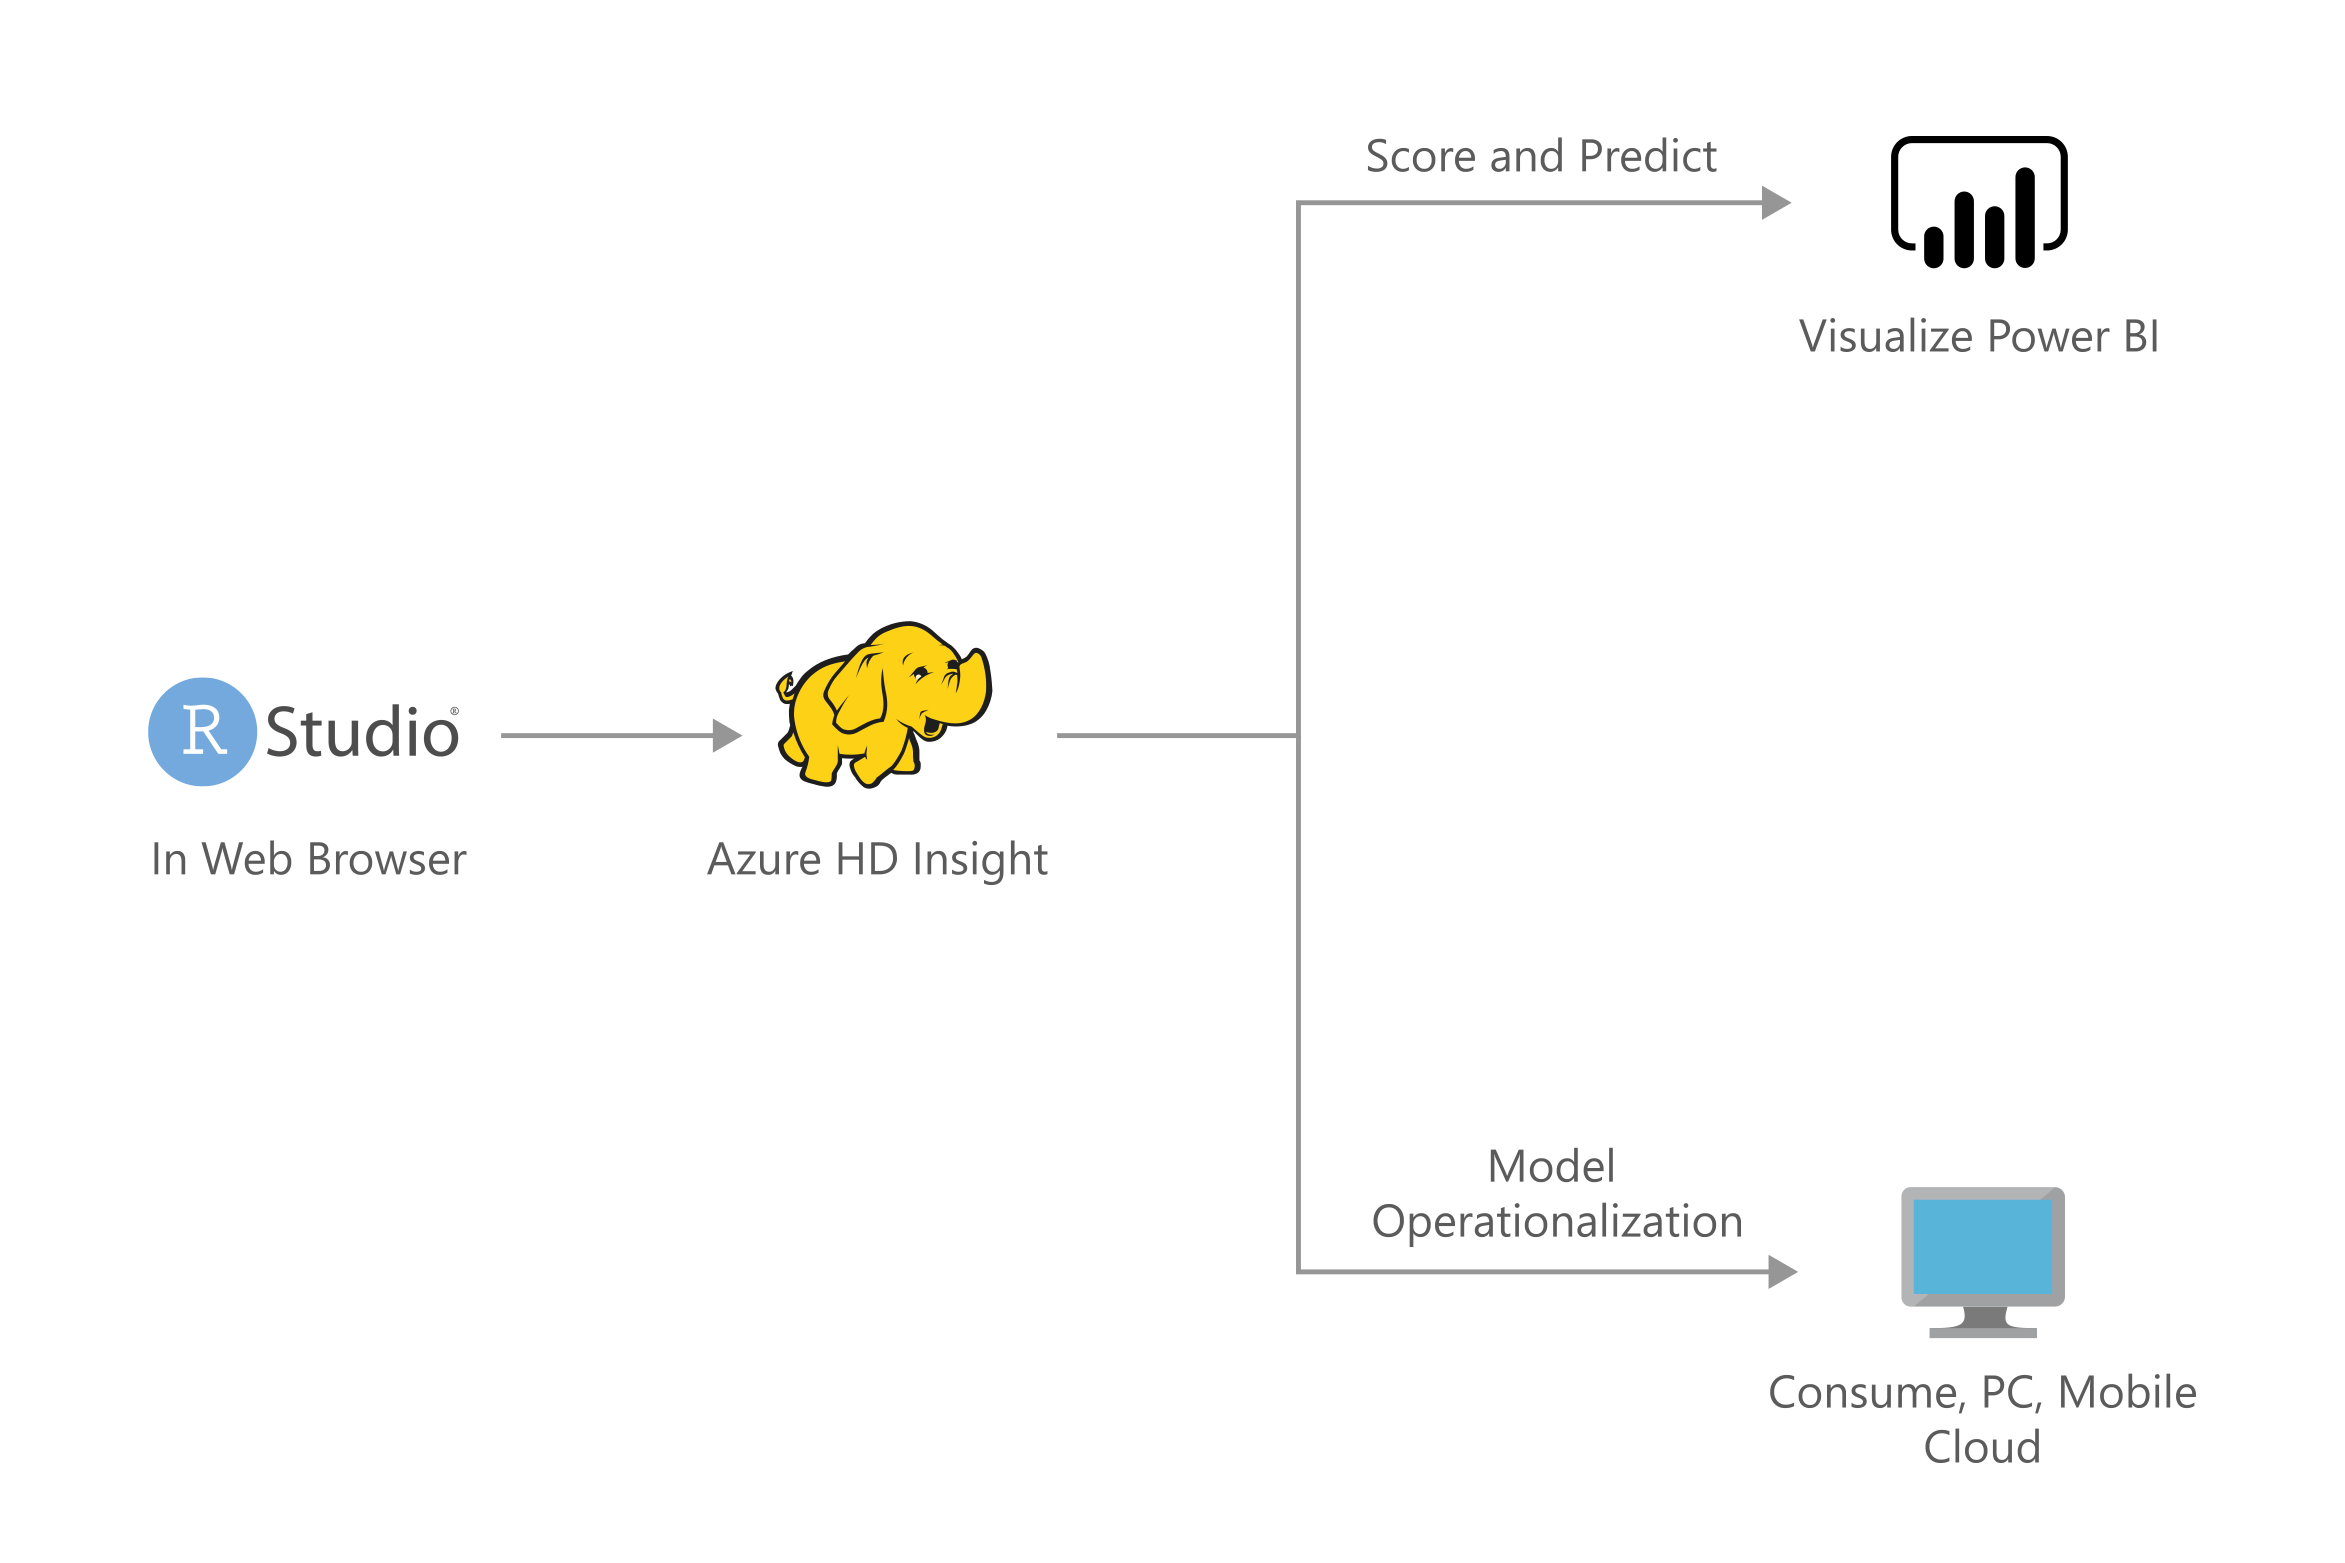 Thumbnail of Campaign Optimization with Azure HDInsight Spark Clusters Architectural Diagram.